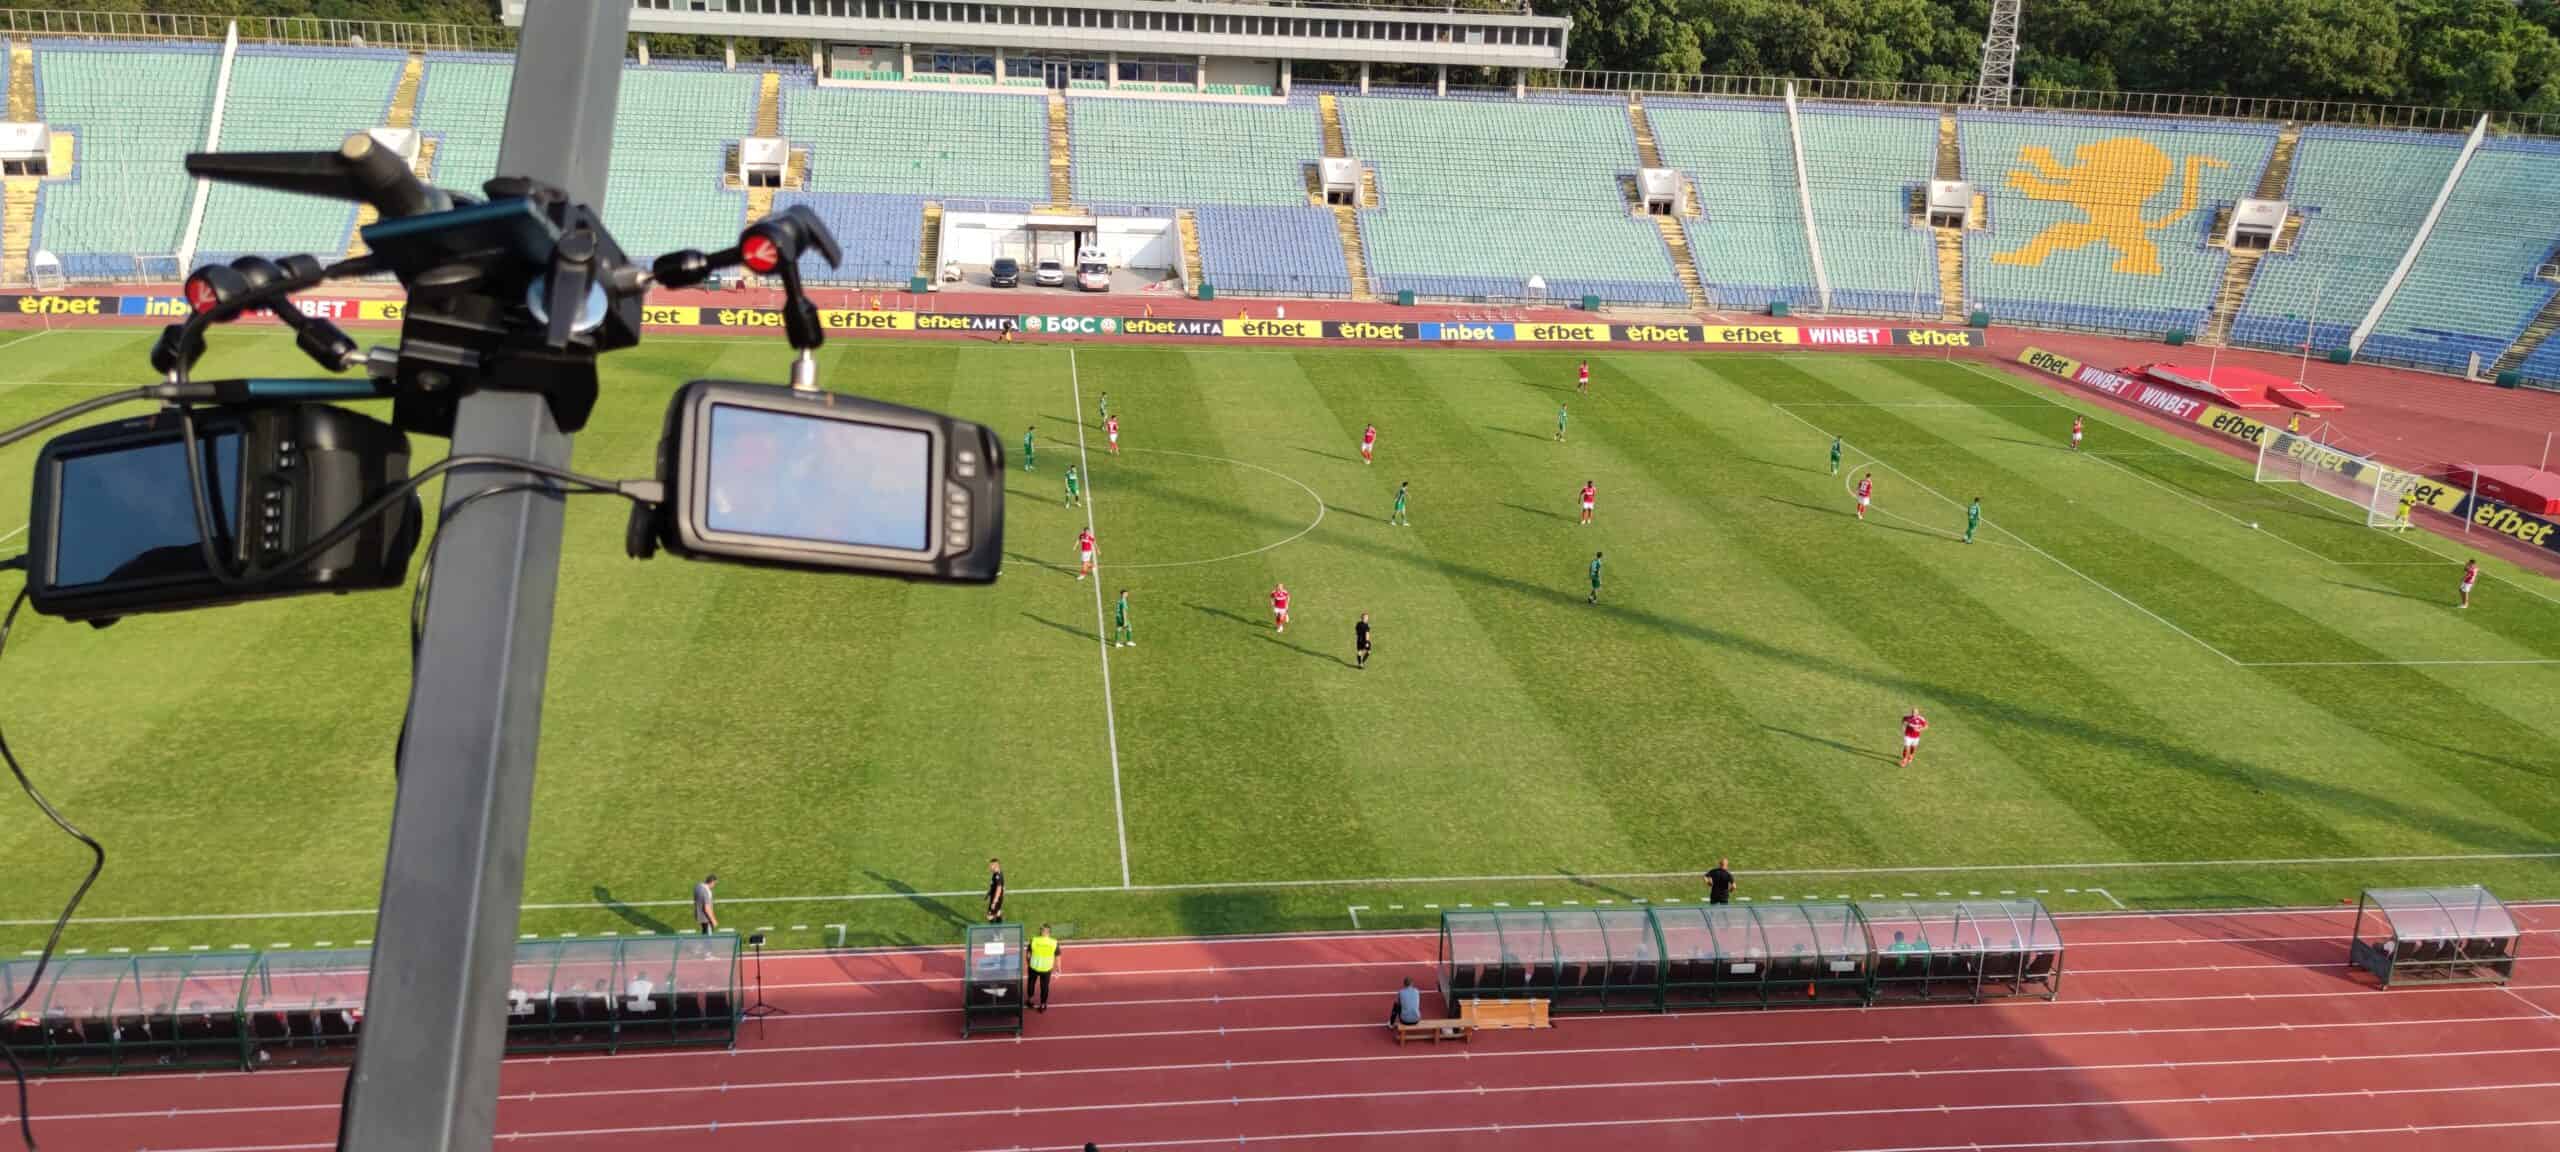 Bulgarian Ubitrack scores with AI optical tracking and sports data 